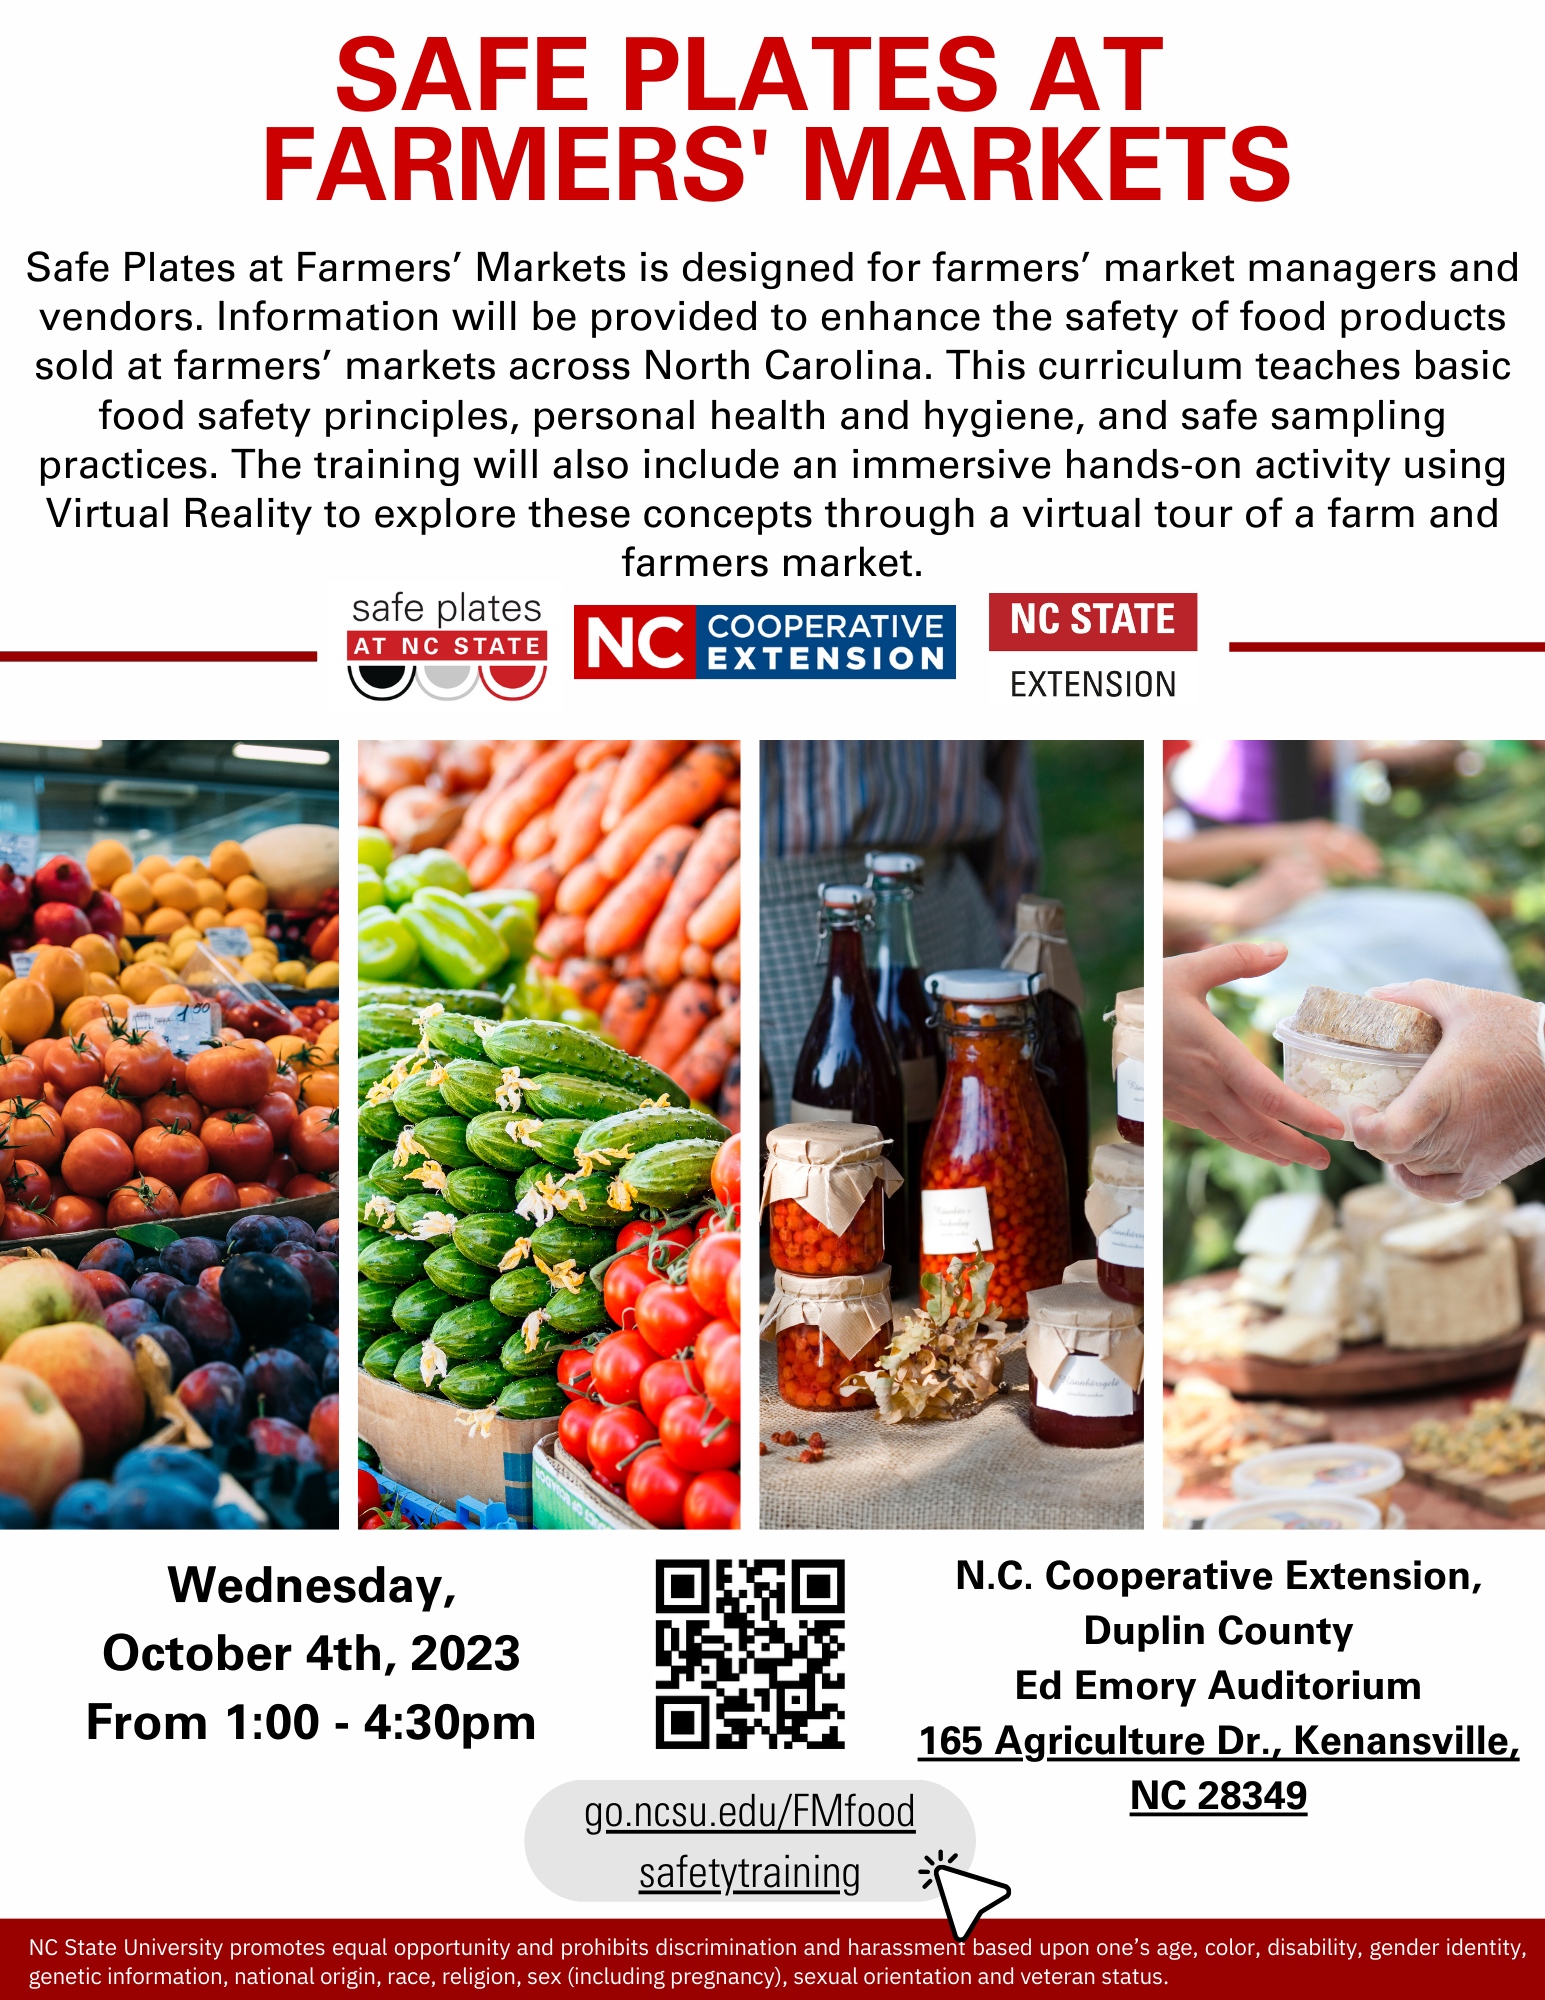 Safe Plates at Farmers' Markets. Safe Plates at Farmers’ Markets is designed for farmers’ market managers and vendors. Information will be provided to enhance the safety of food products sold at farmers’ markets across North Carolina. This curriculum teaches basic food safety principles, personal health and hygiene, and safe sampling practices. The training will also include an immersive hands-on activity using Virtual Reality to explore these concepts through a virtual tour of a farm.